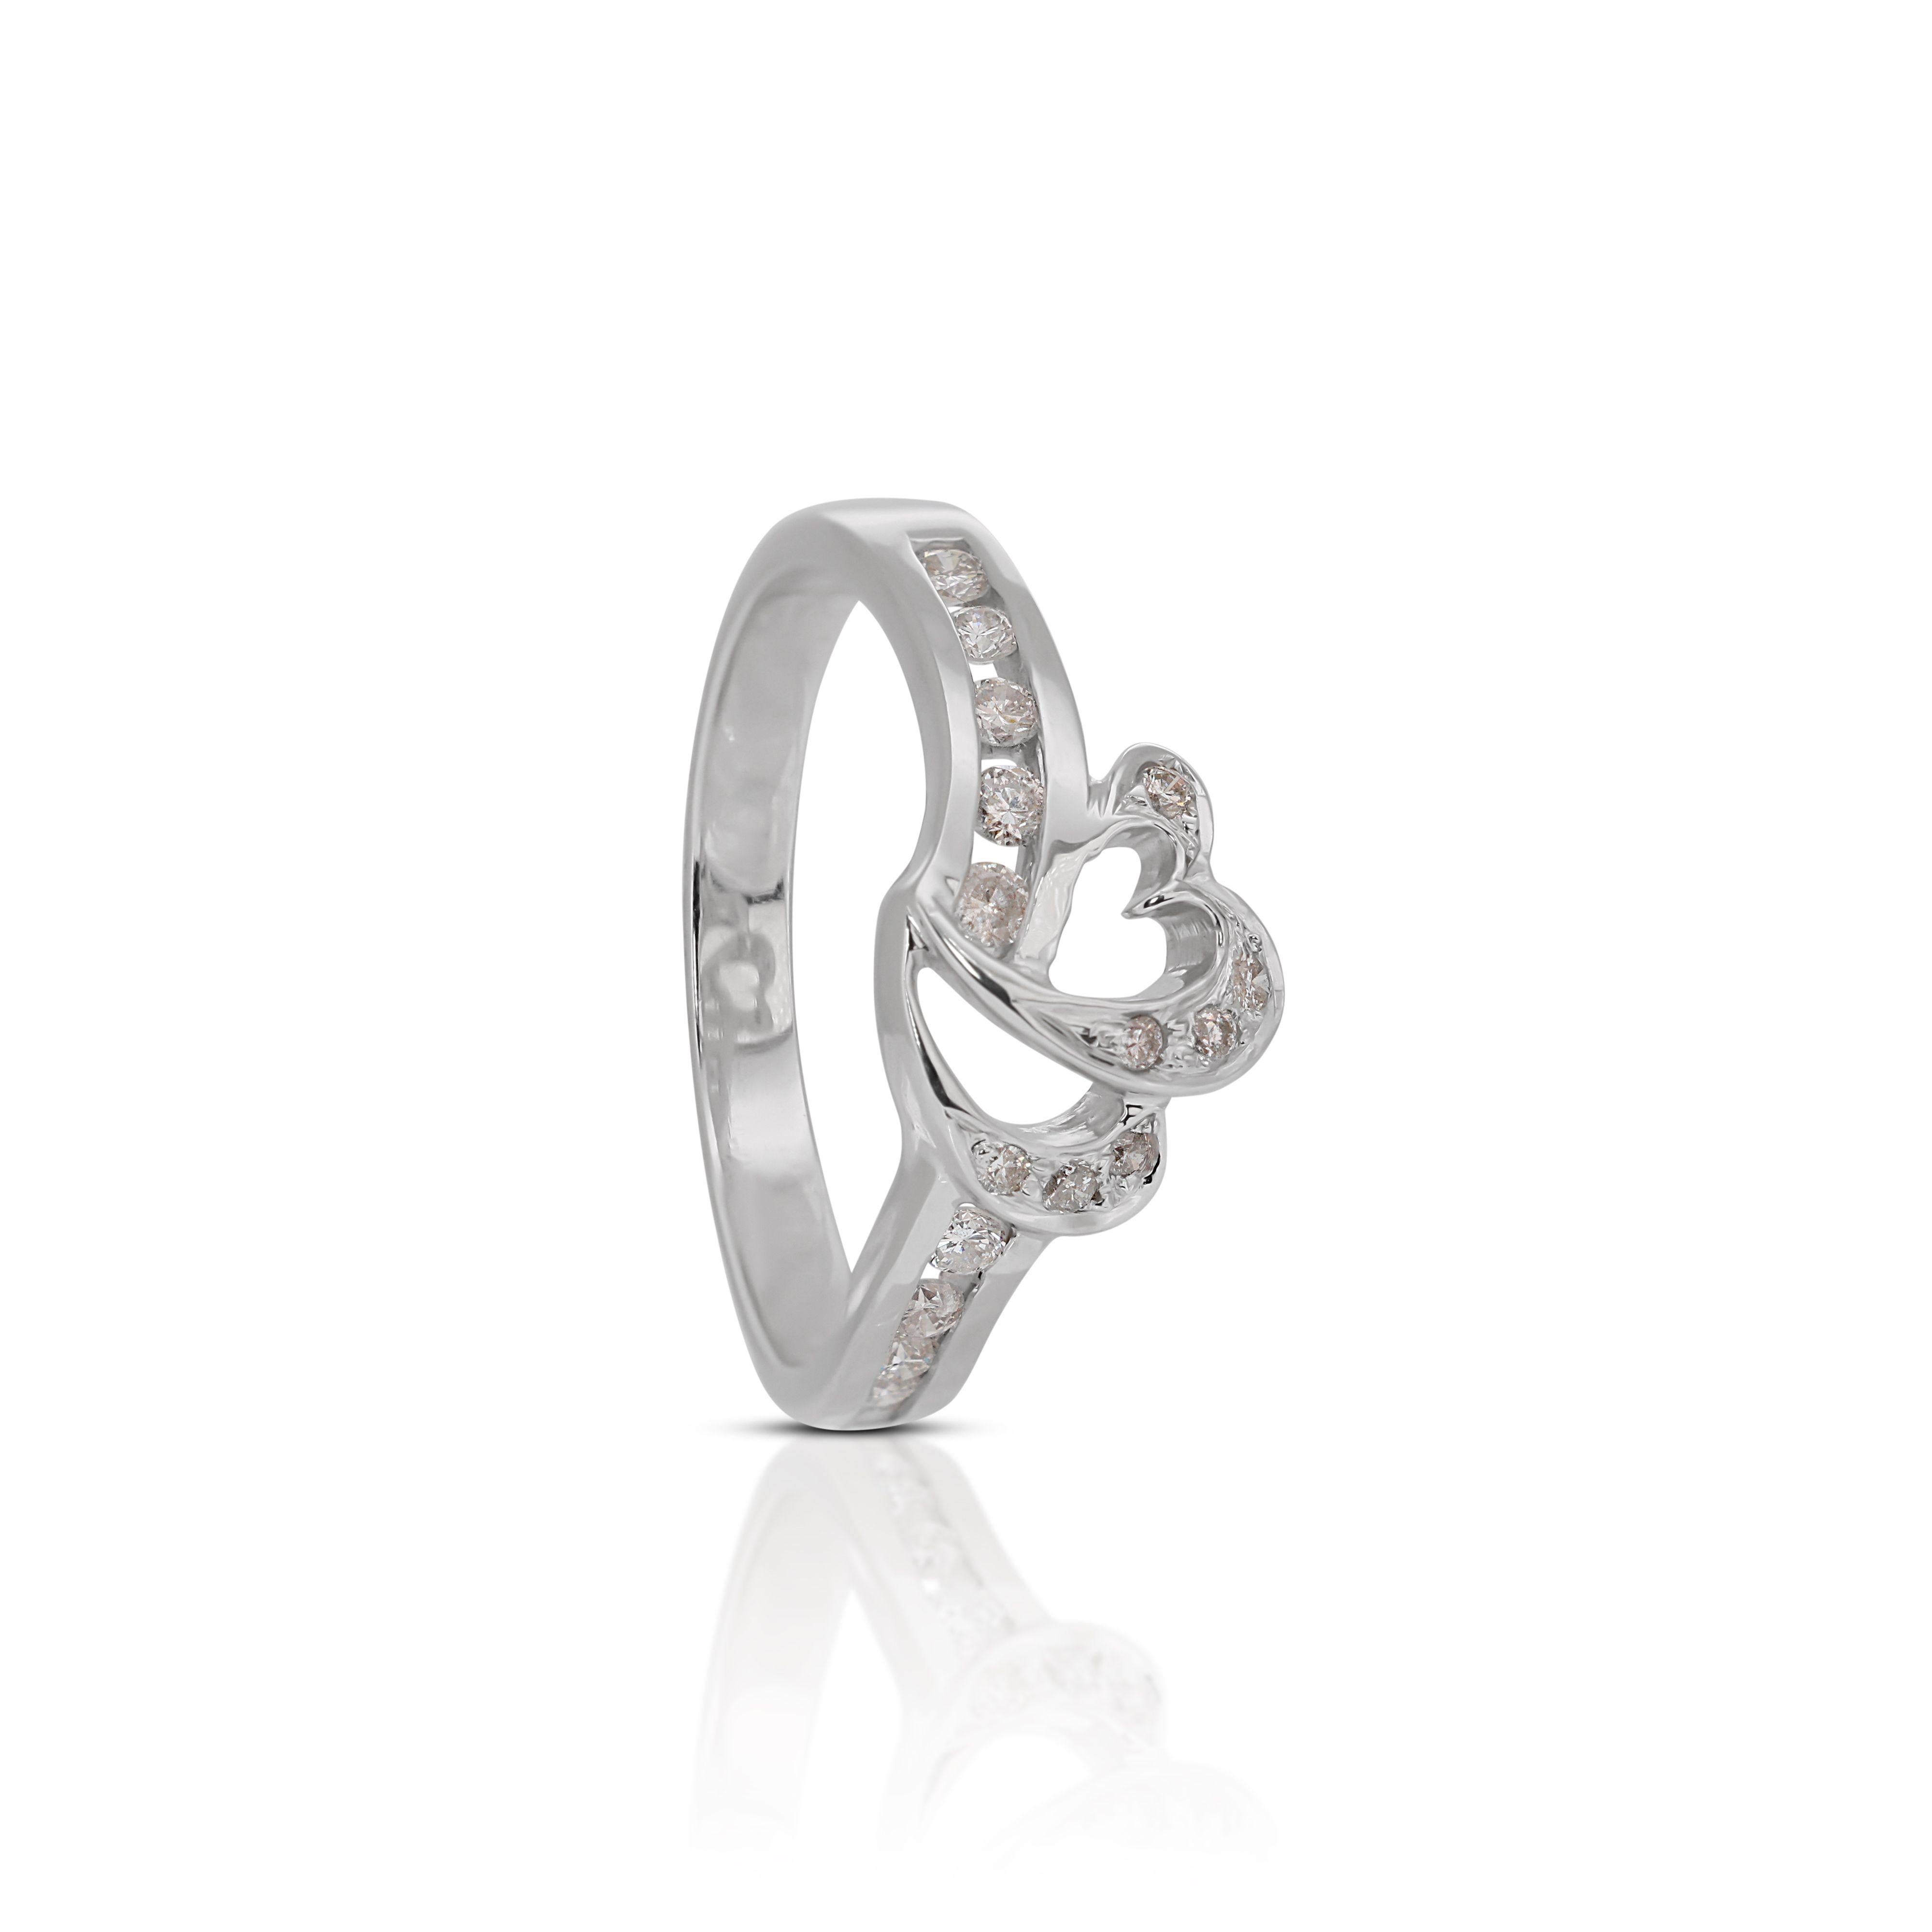 Stunning 0.25ct Heart-shaped Diamond Ring For Sale 1